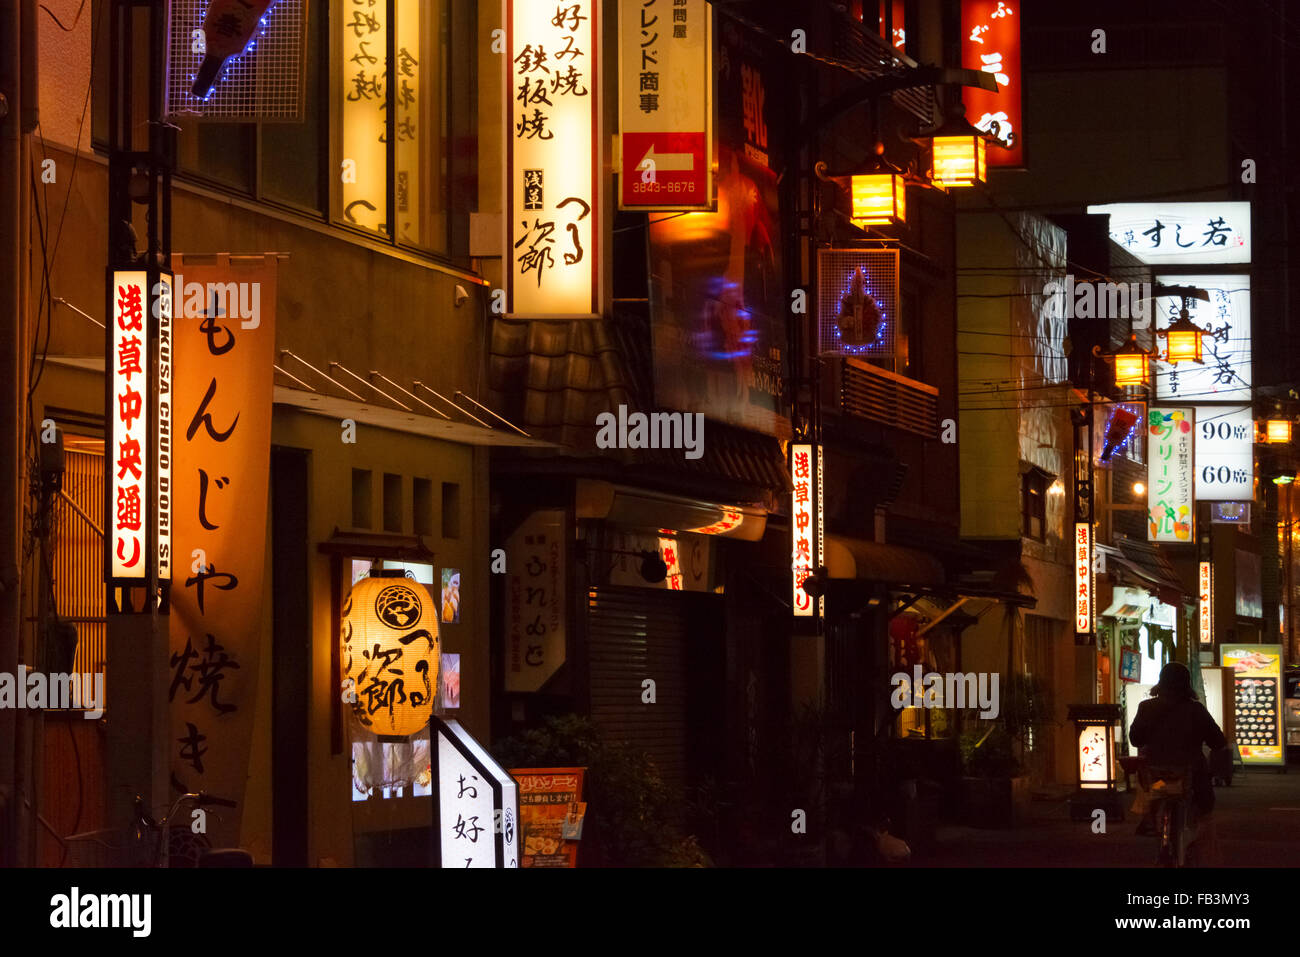 Night view of shops along the street, Tokyo, Japan Stock Photo